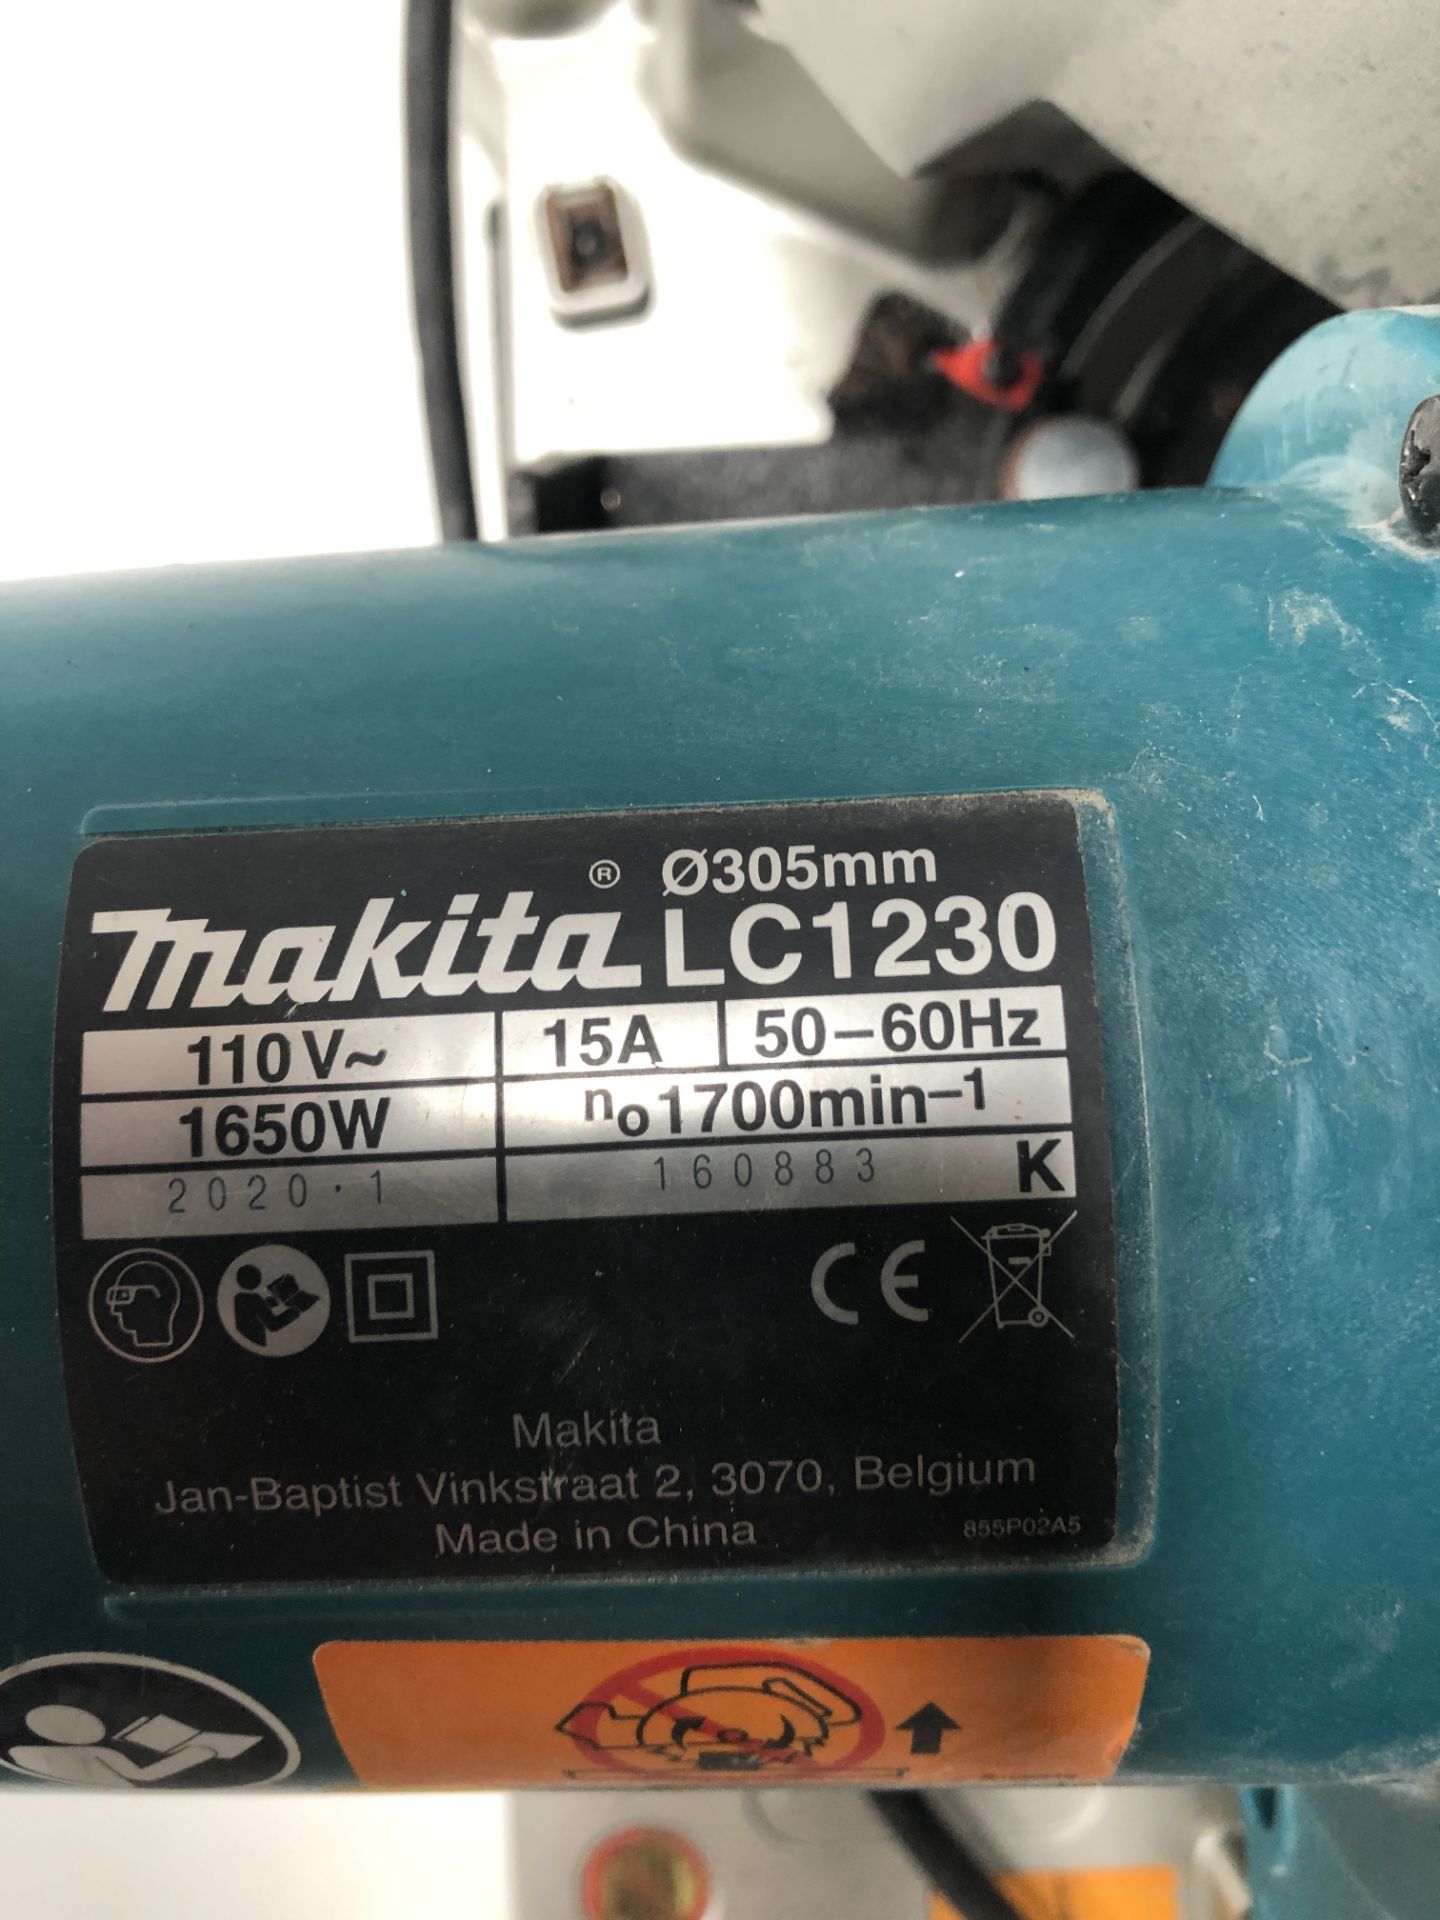 Makita LC1230 305mm TCT Cut Off Saw, Serial Number 160883, 110v (Location: Brentwood. Please Refer - Image 2 of 2